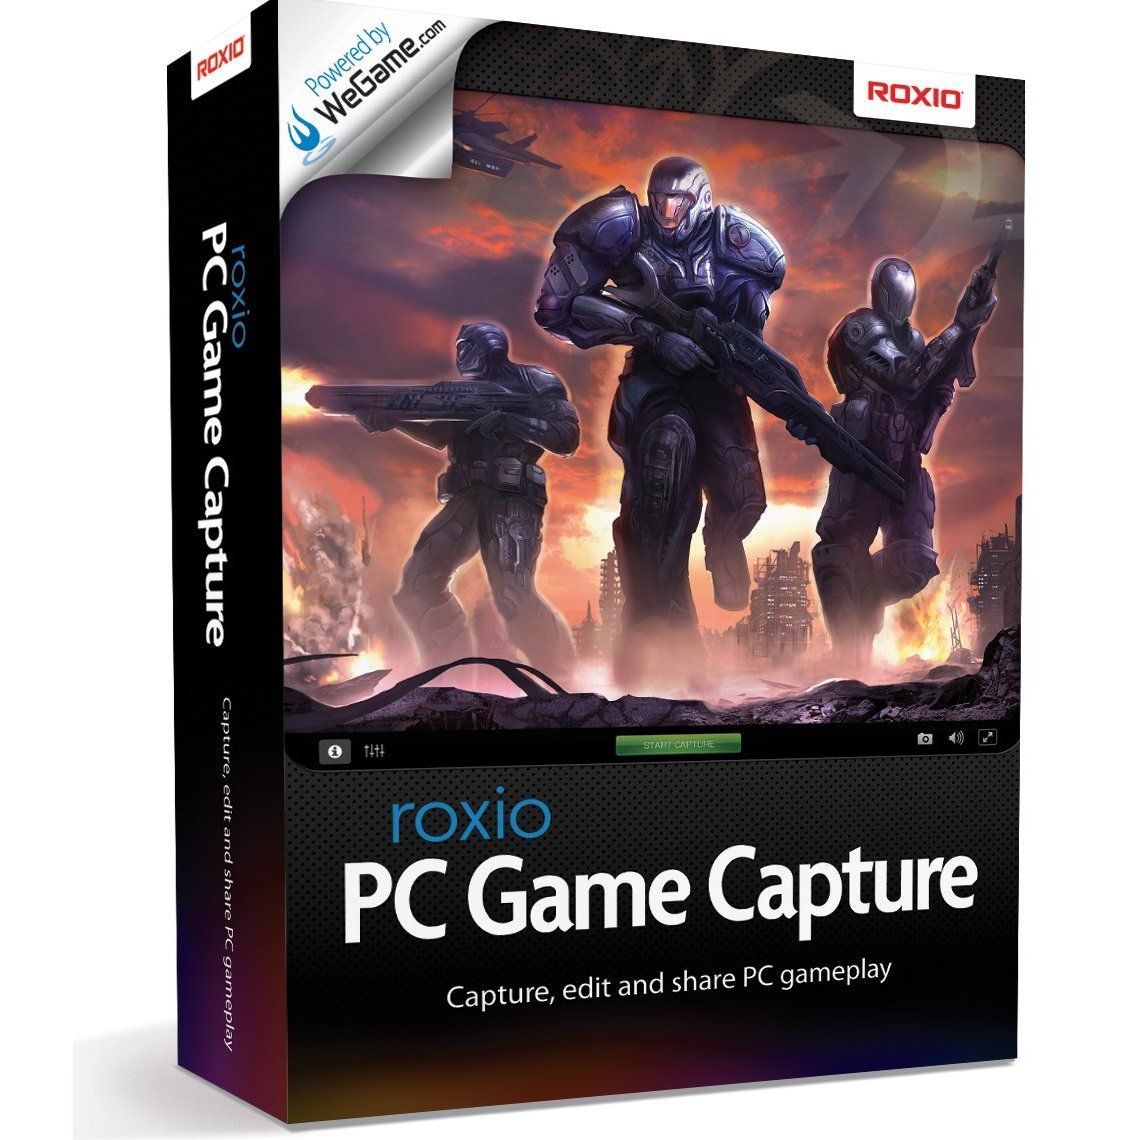 Roxio PC Game Capture software capture edit and share PC gameplay